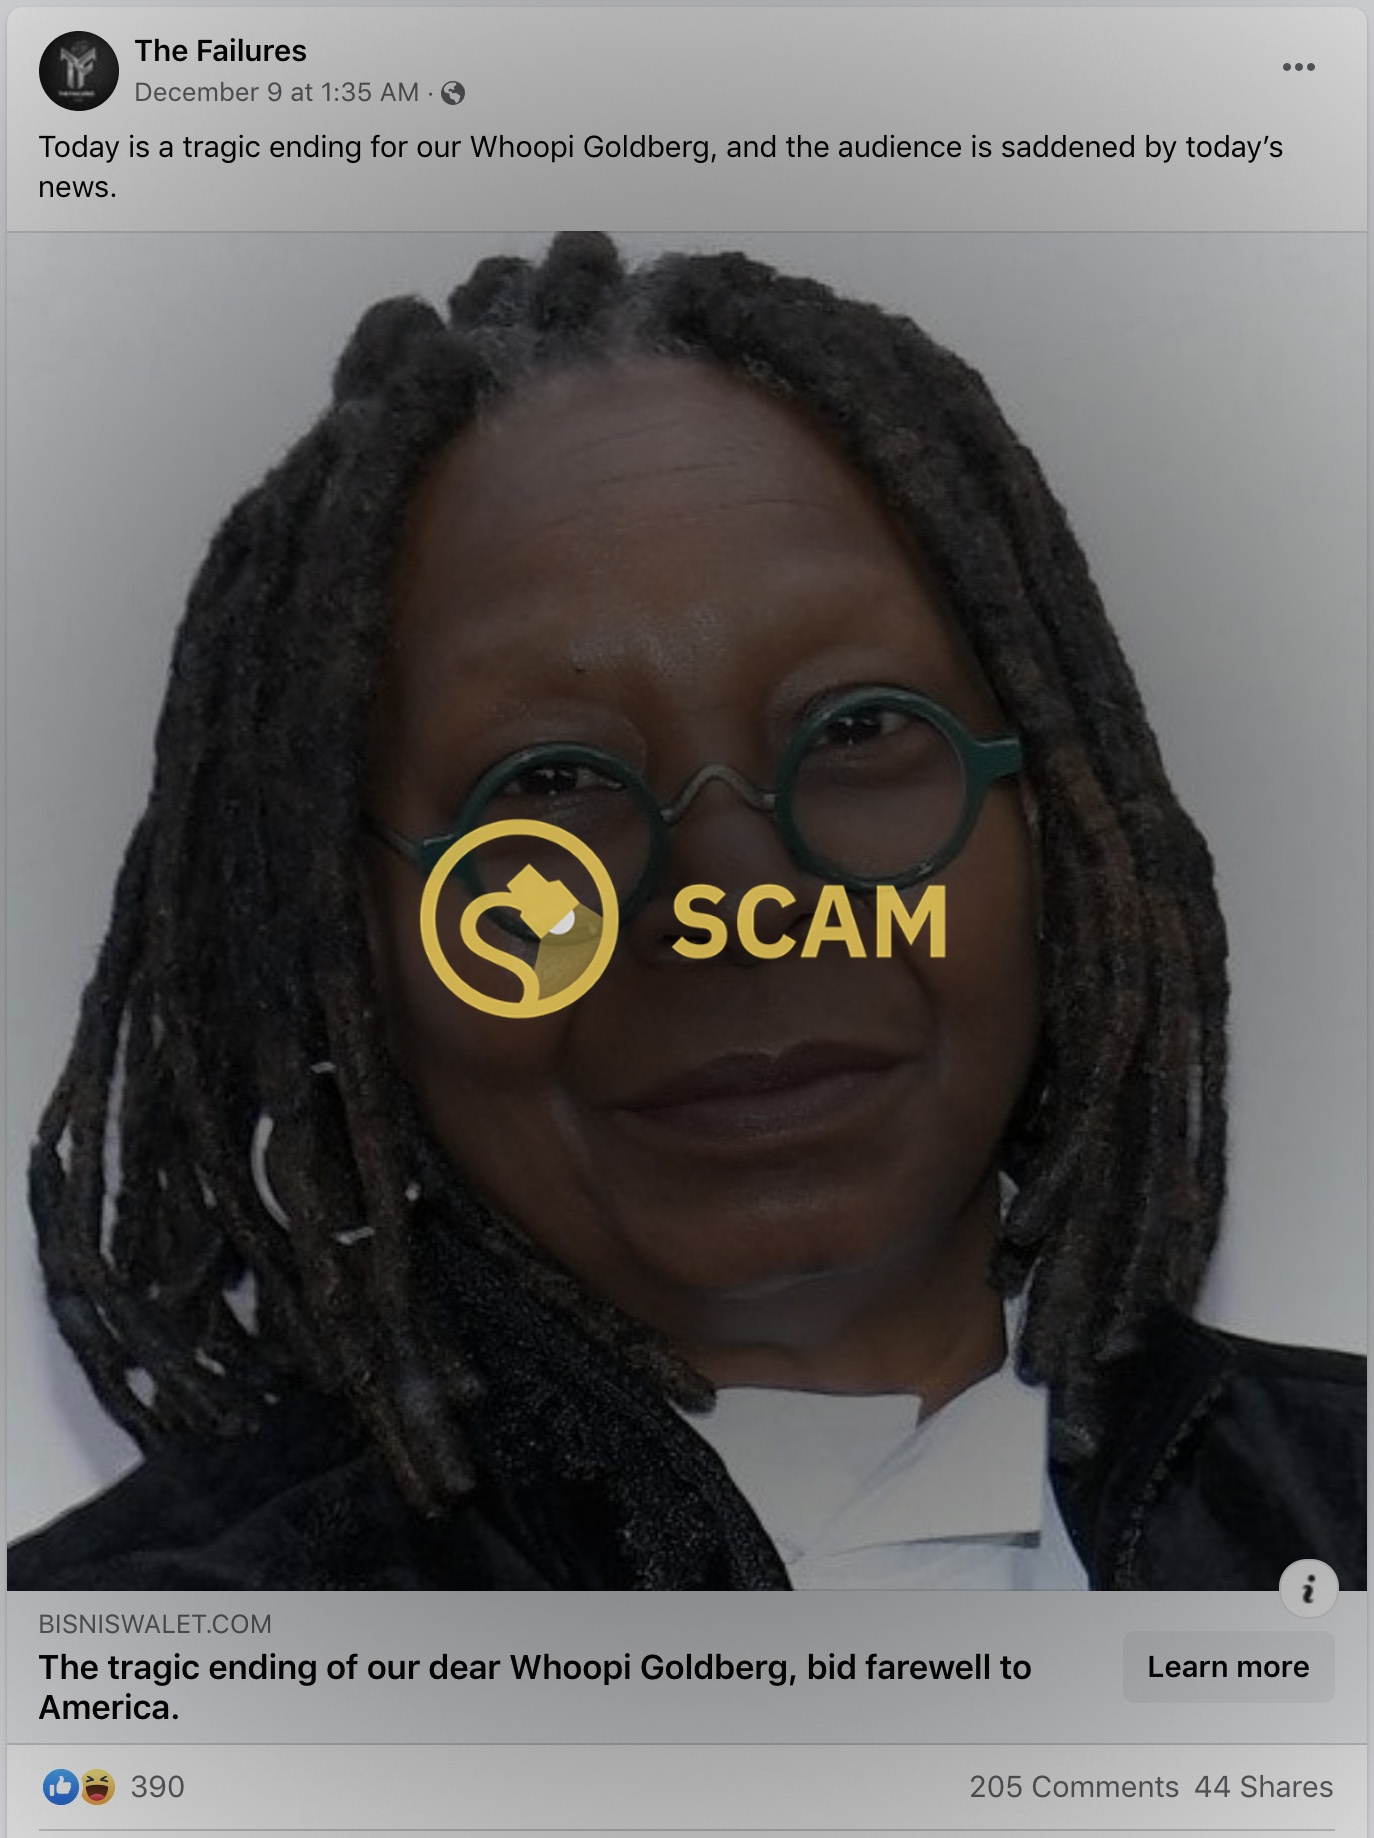 A Whoopi Goldberg death hoax was advertised on Facebook that led to a CBD product line endorsement which included Oprah Winfrey and other celebrities.